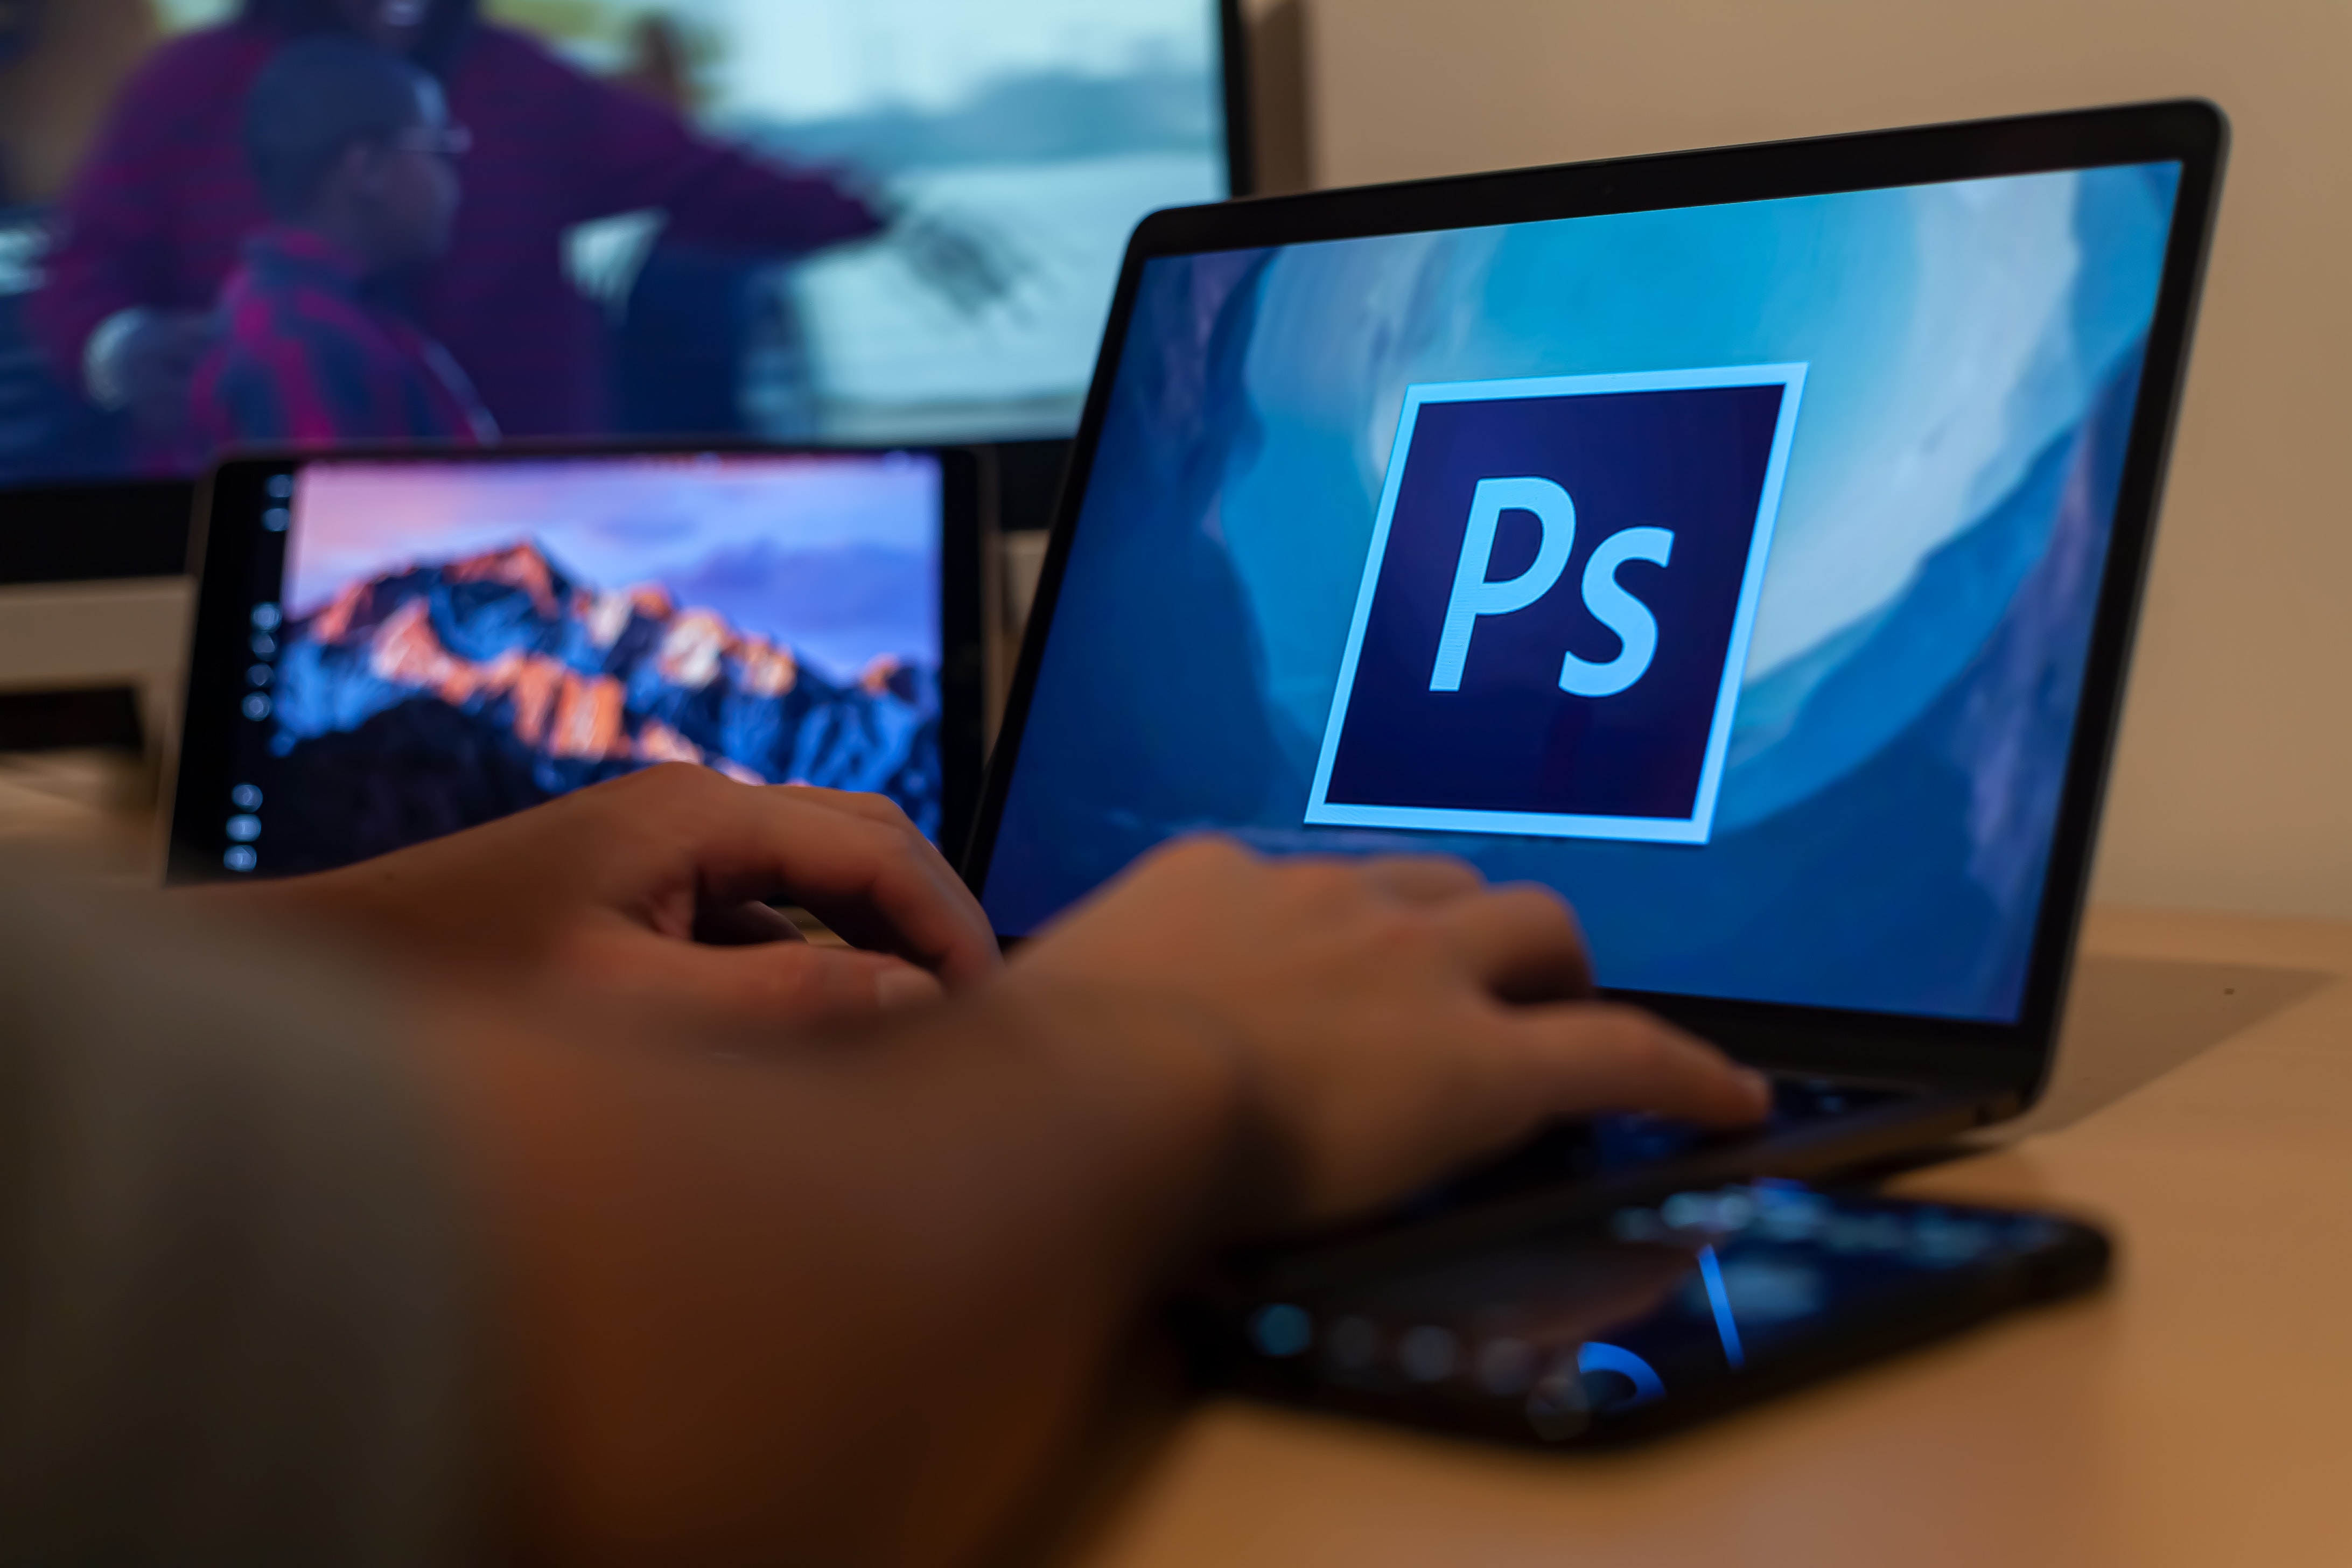 Photoshop reigns supreme: how the software has maintained market dominance